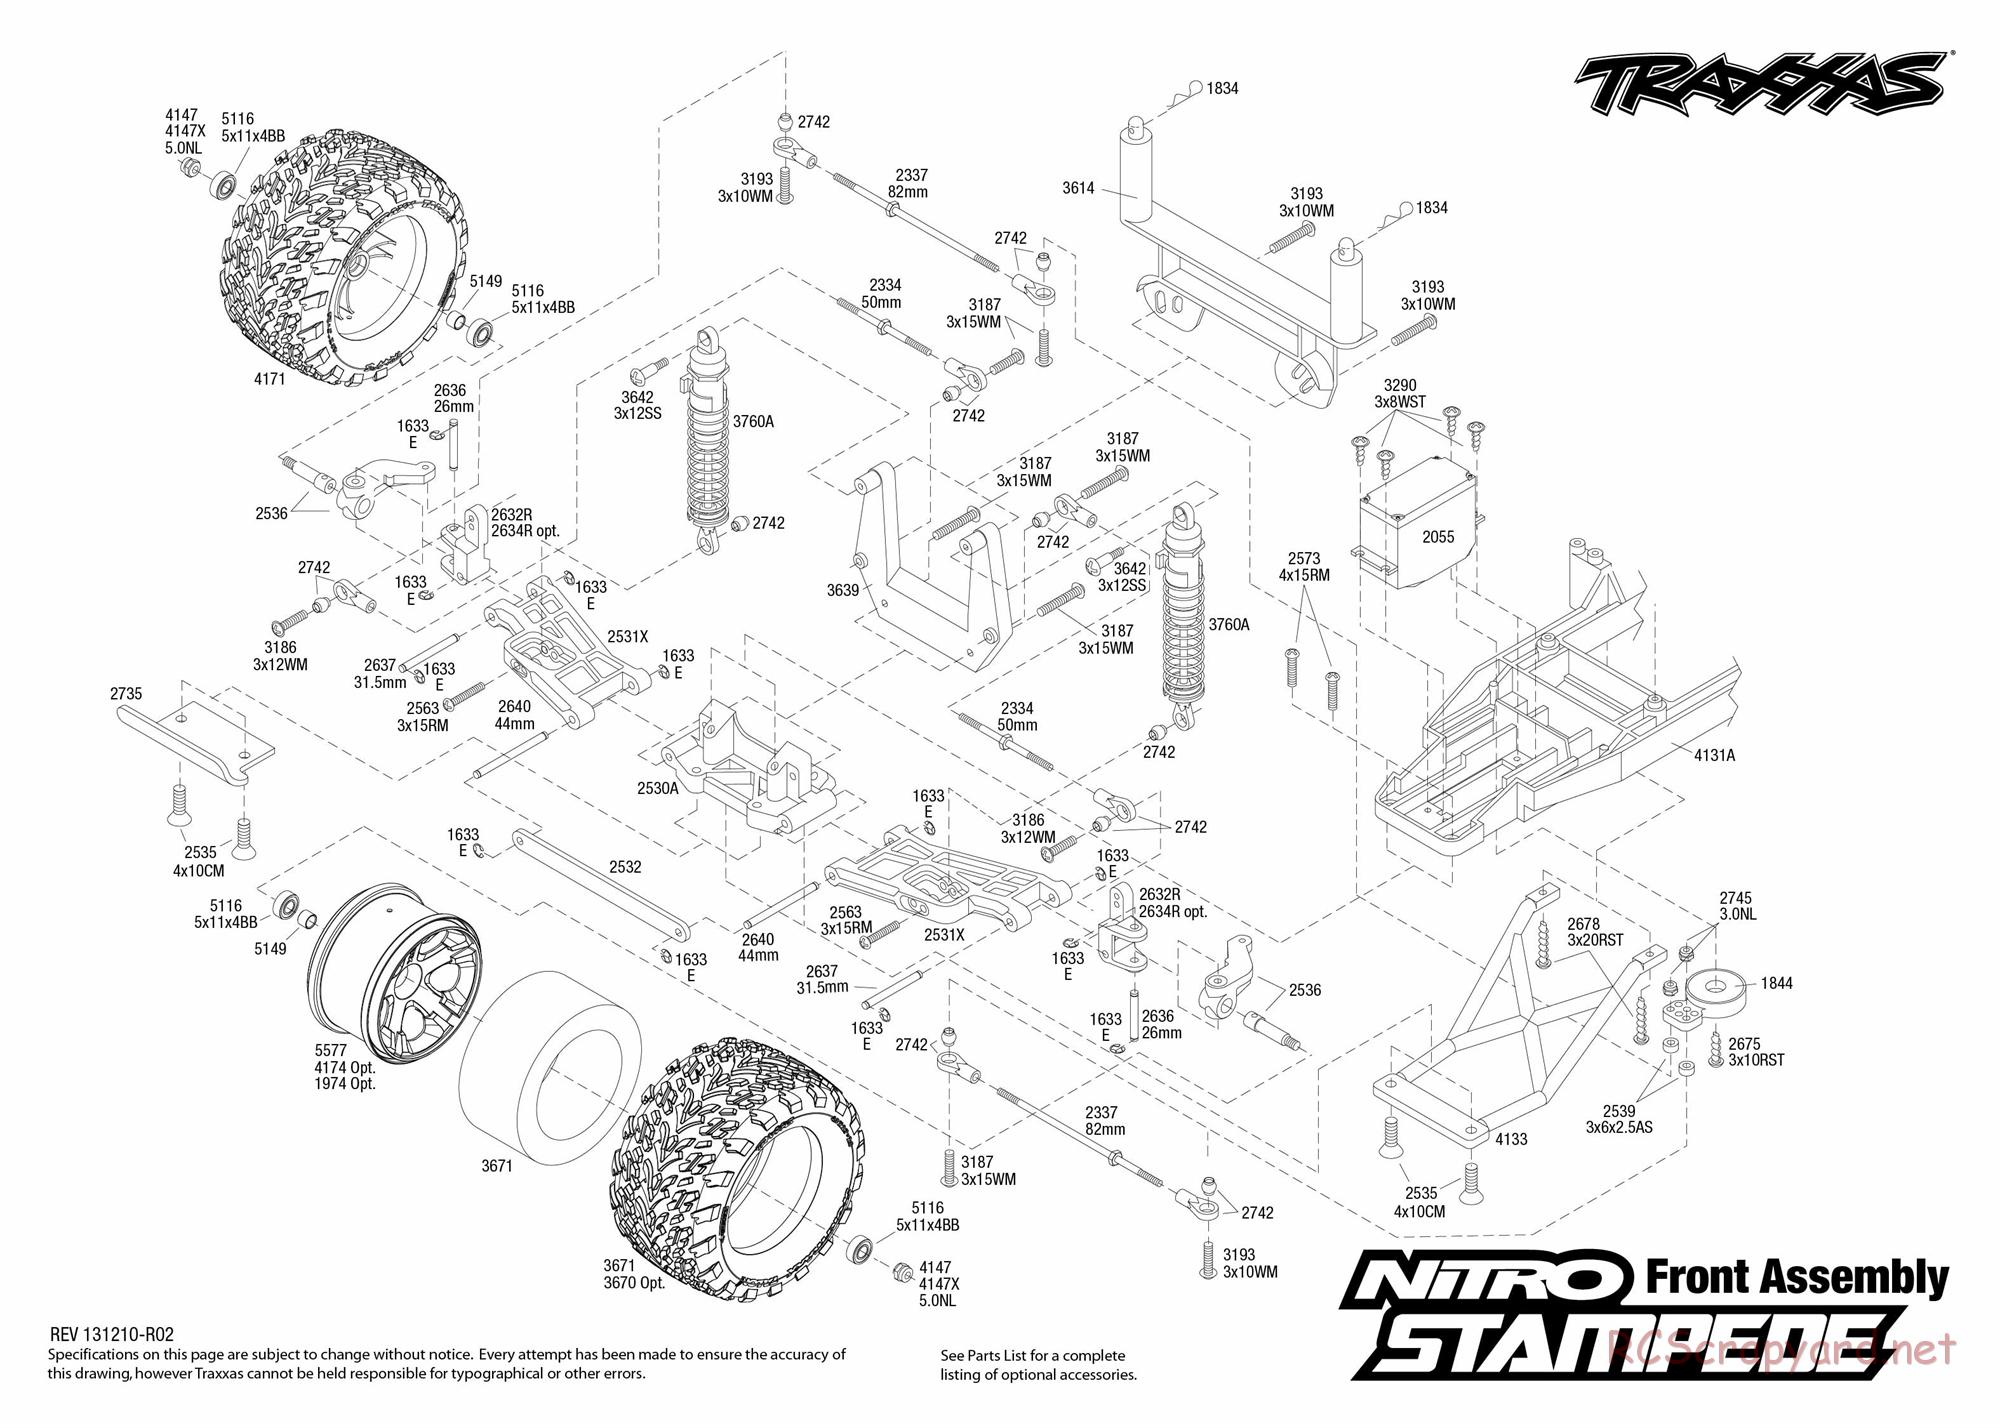 Traxxas - Nitro Stampede (2013) - Exploded Views - Page 2